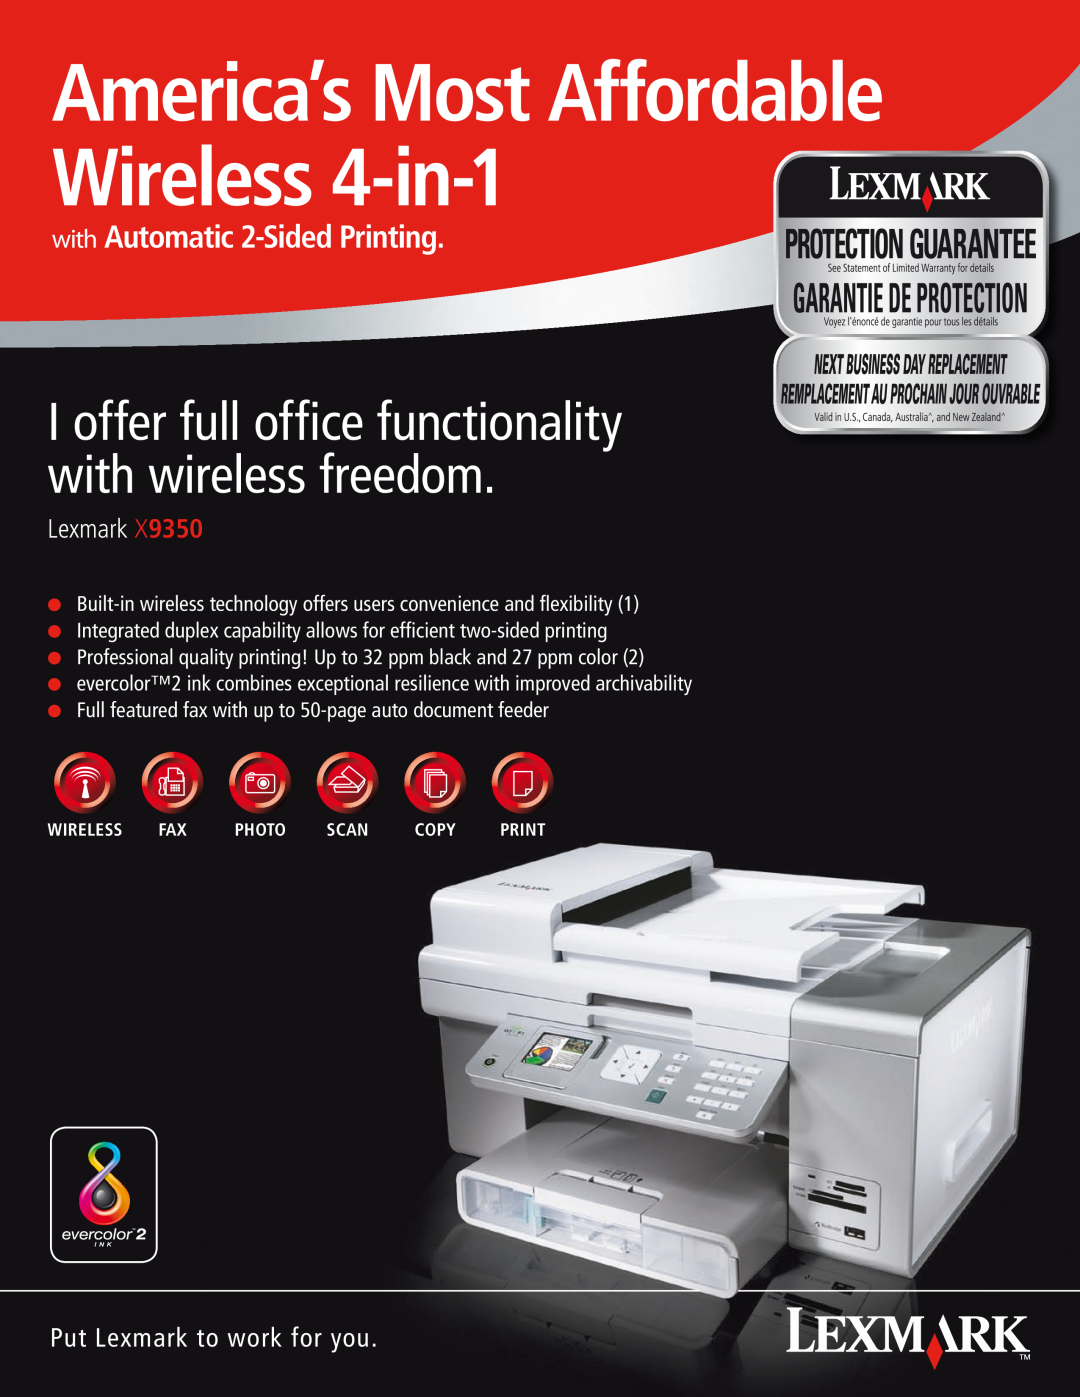 Lexmark x9350 manual America’s Most Affordable Wireless 4-in-1, with Automatic 2-SidedPrinting, Lexmark 